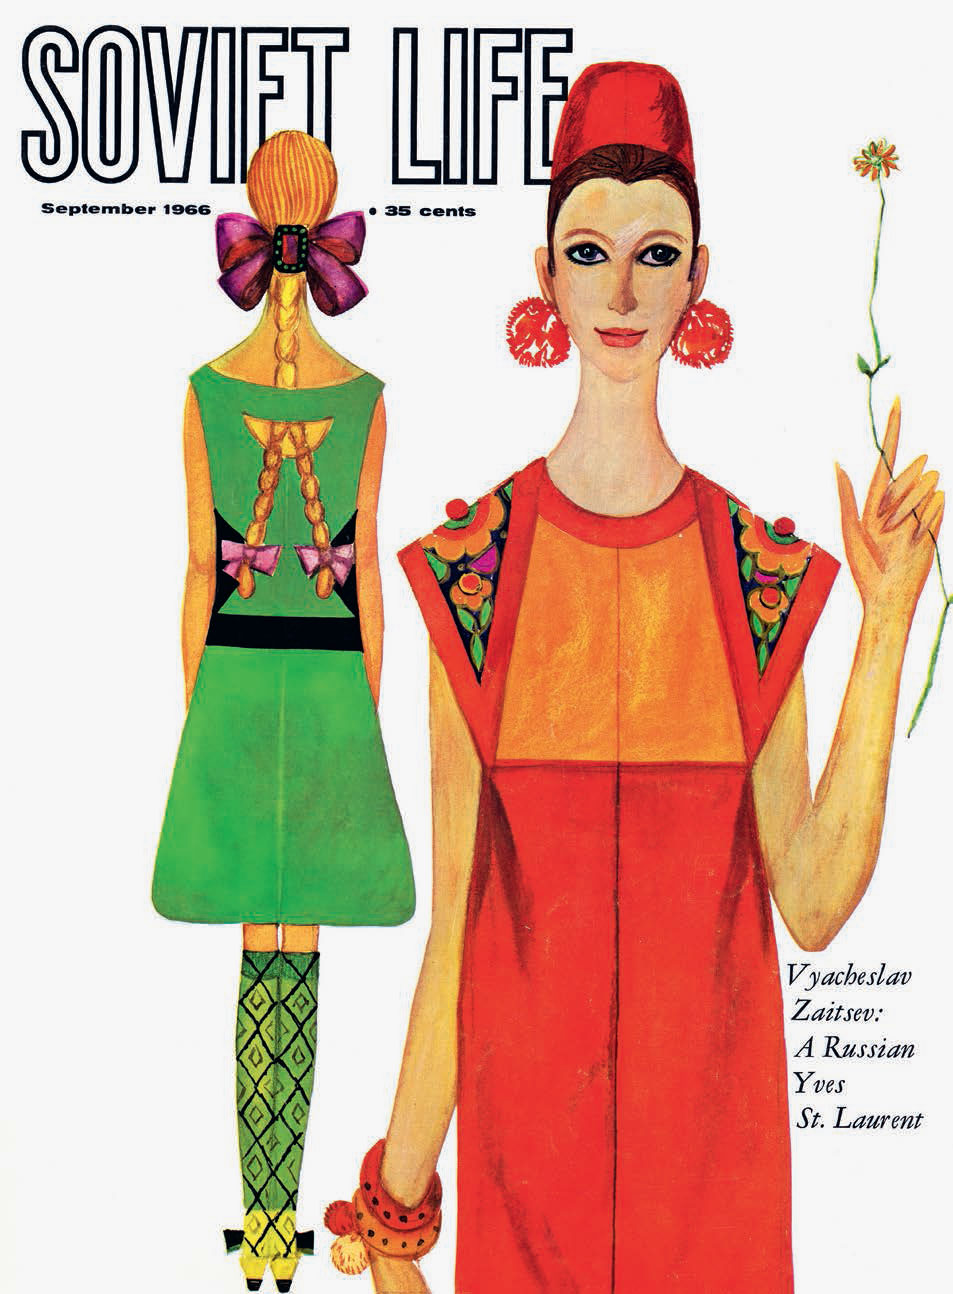 Soviet Life magazine, September 1966. As reproduced in Designed in the USSR